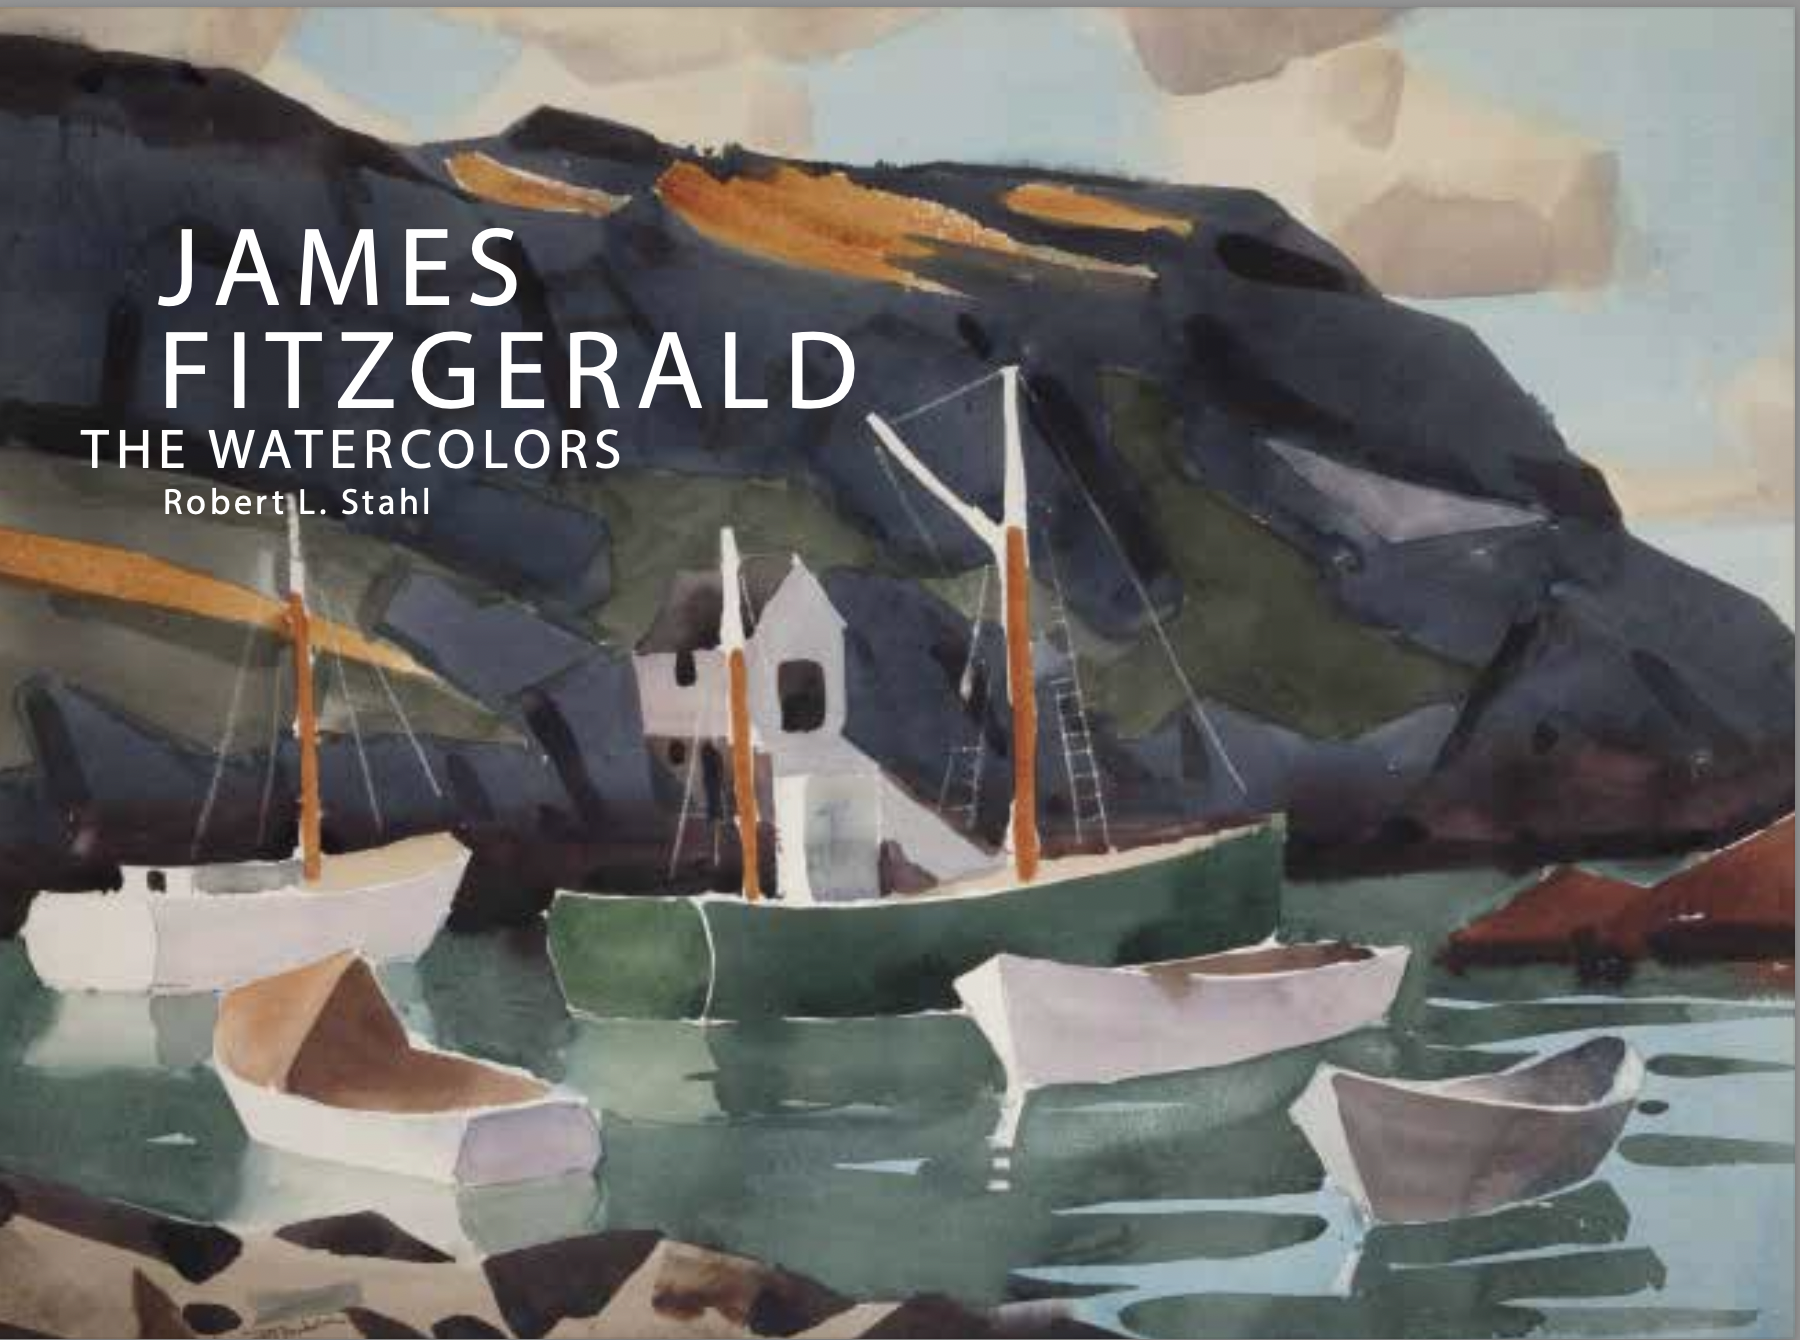 Cover of ‘James Fitzgerald: The Watercolors, Volume II Catalogue Raisonne,’ which was released July 5.